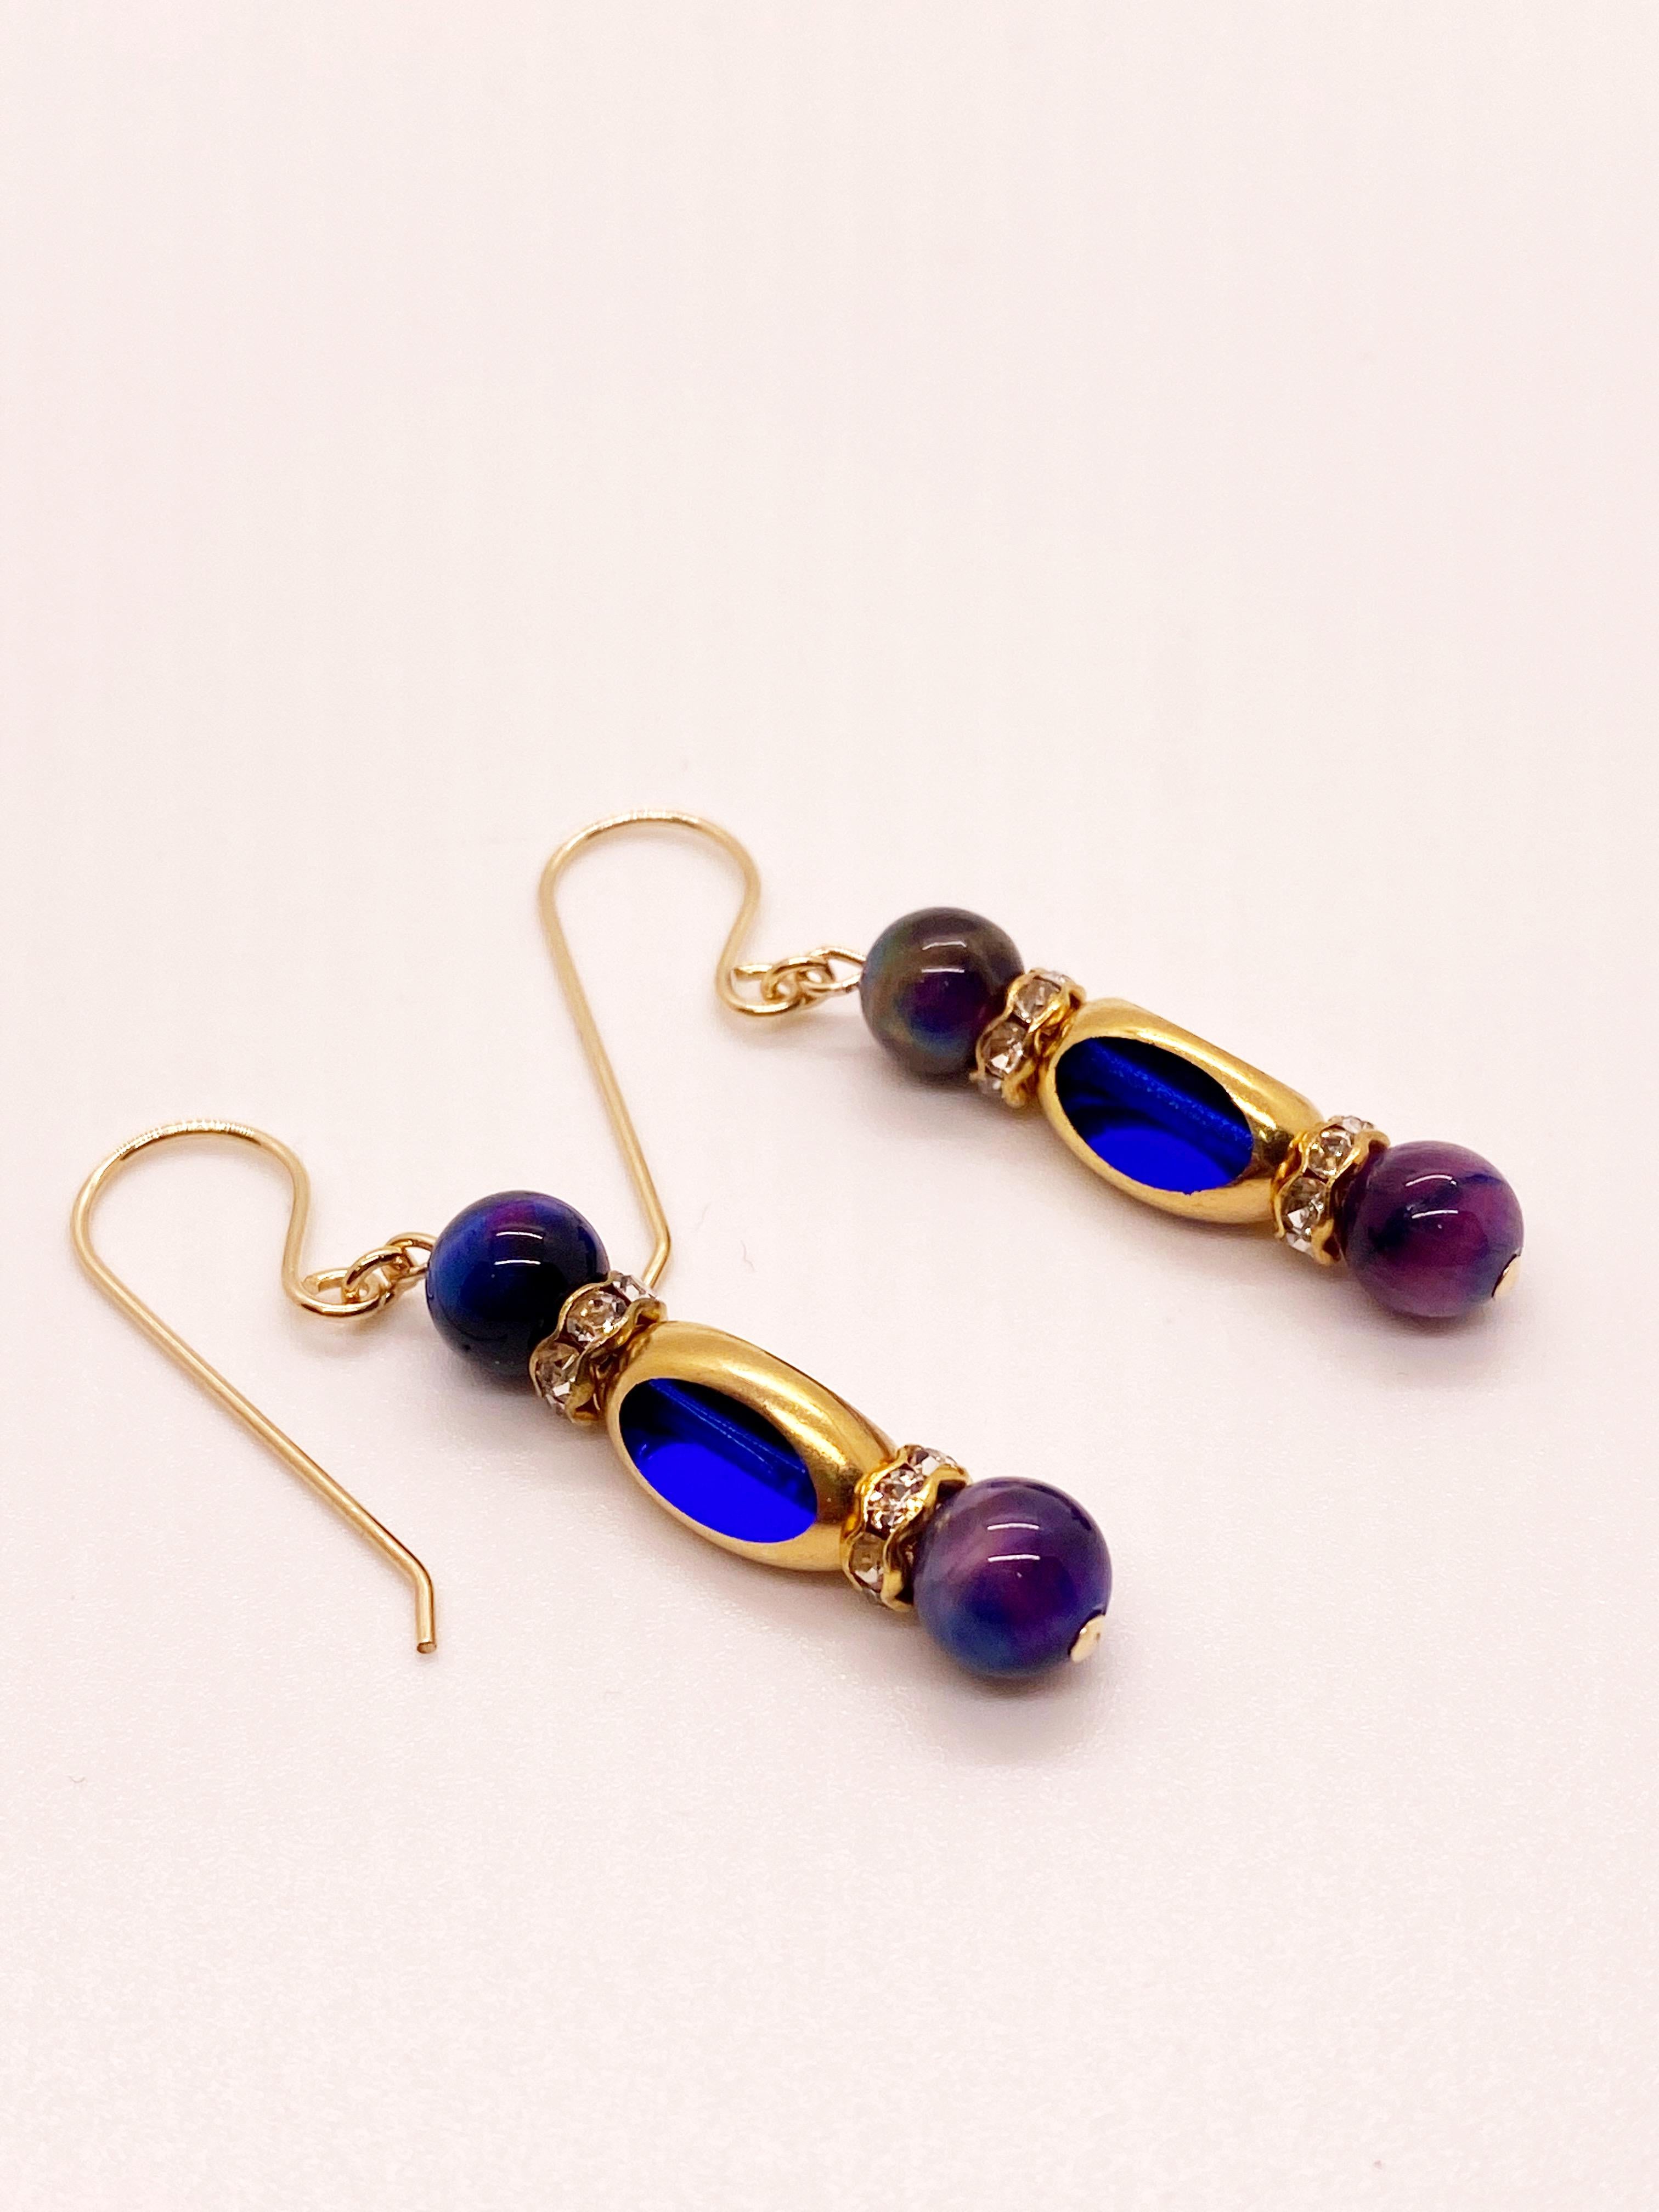 Round Cut Vintage German Glass Window Beads with 24K gold Blue Tiger's Eye Earrings